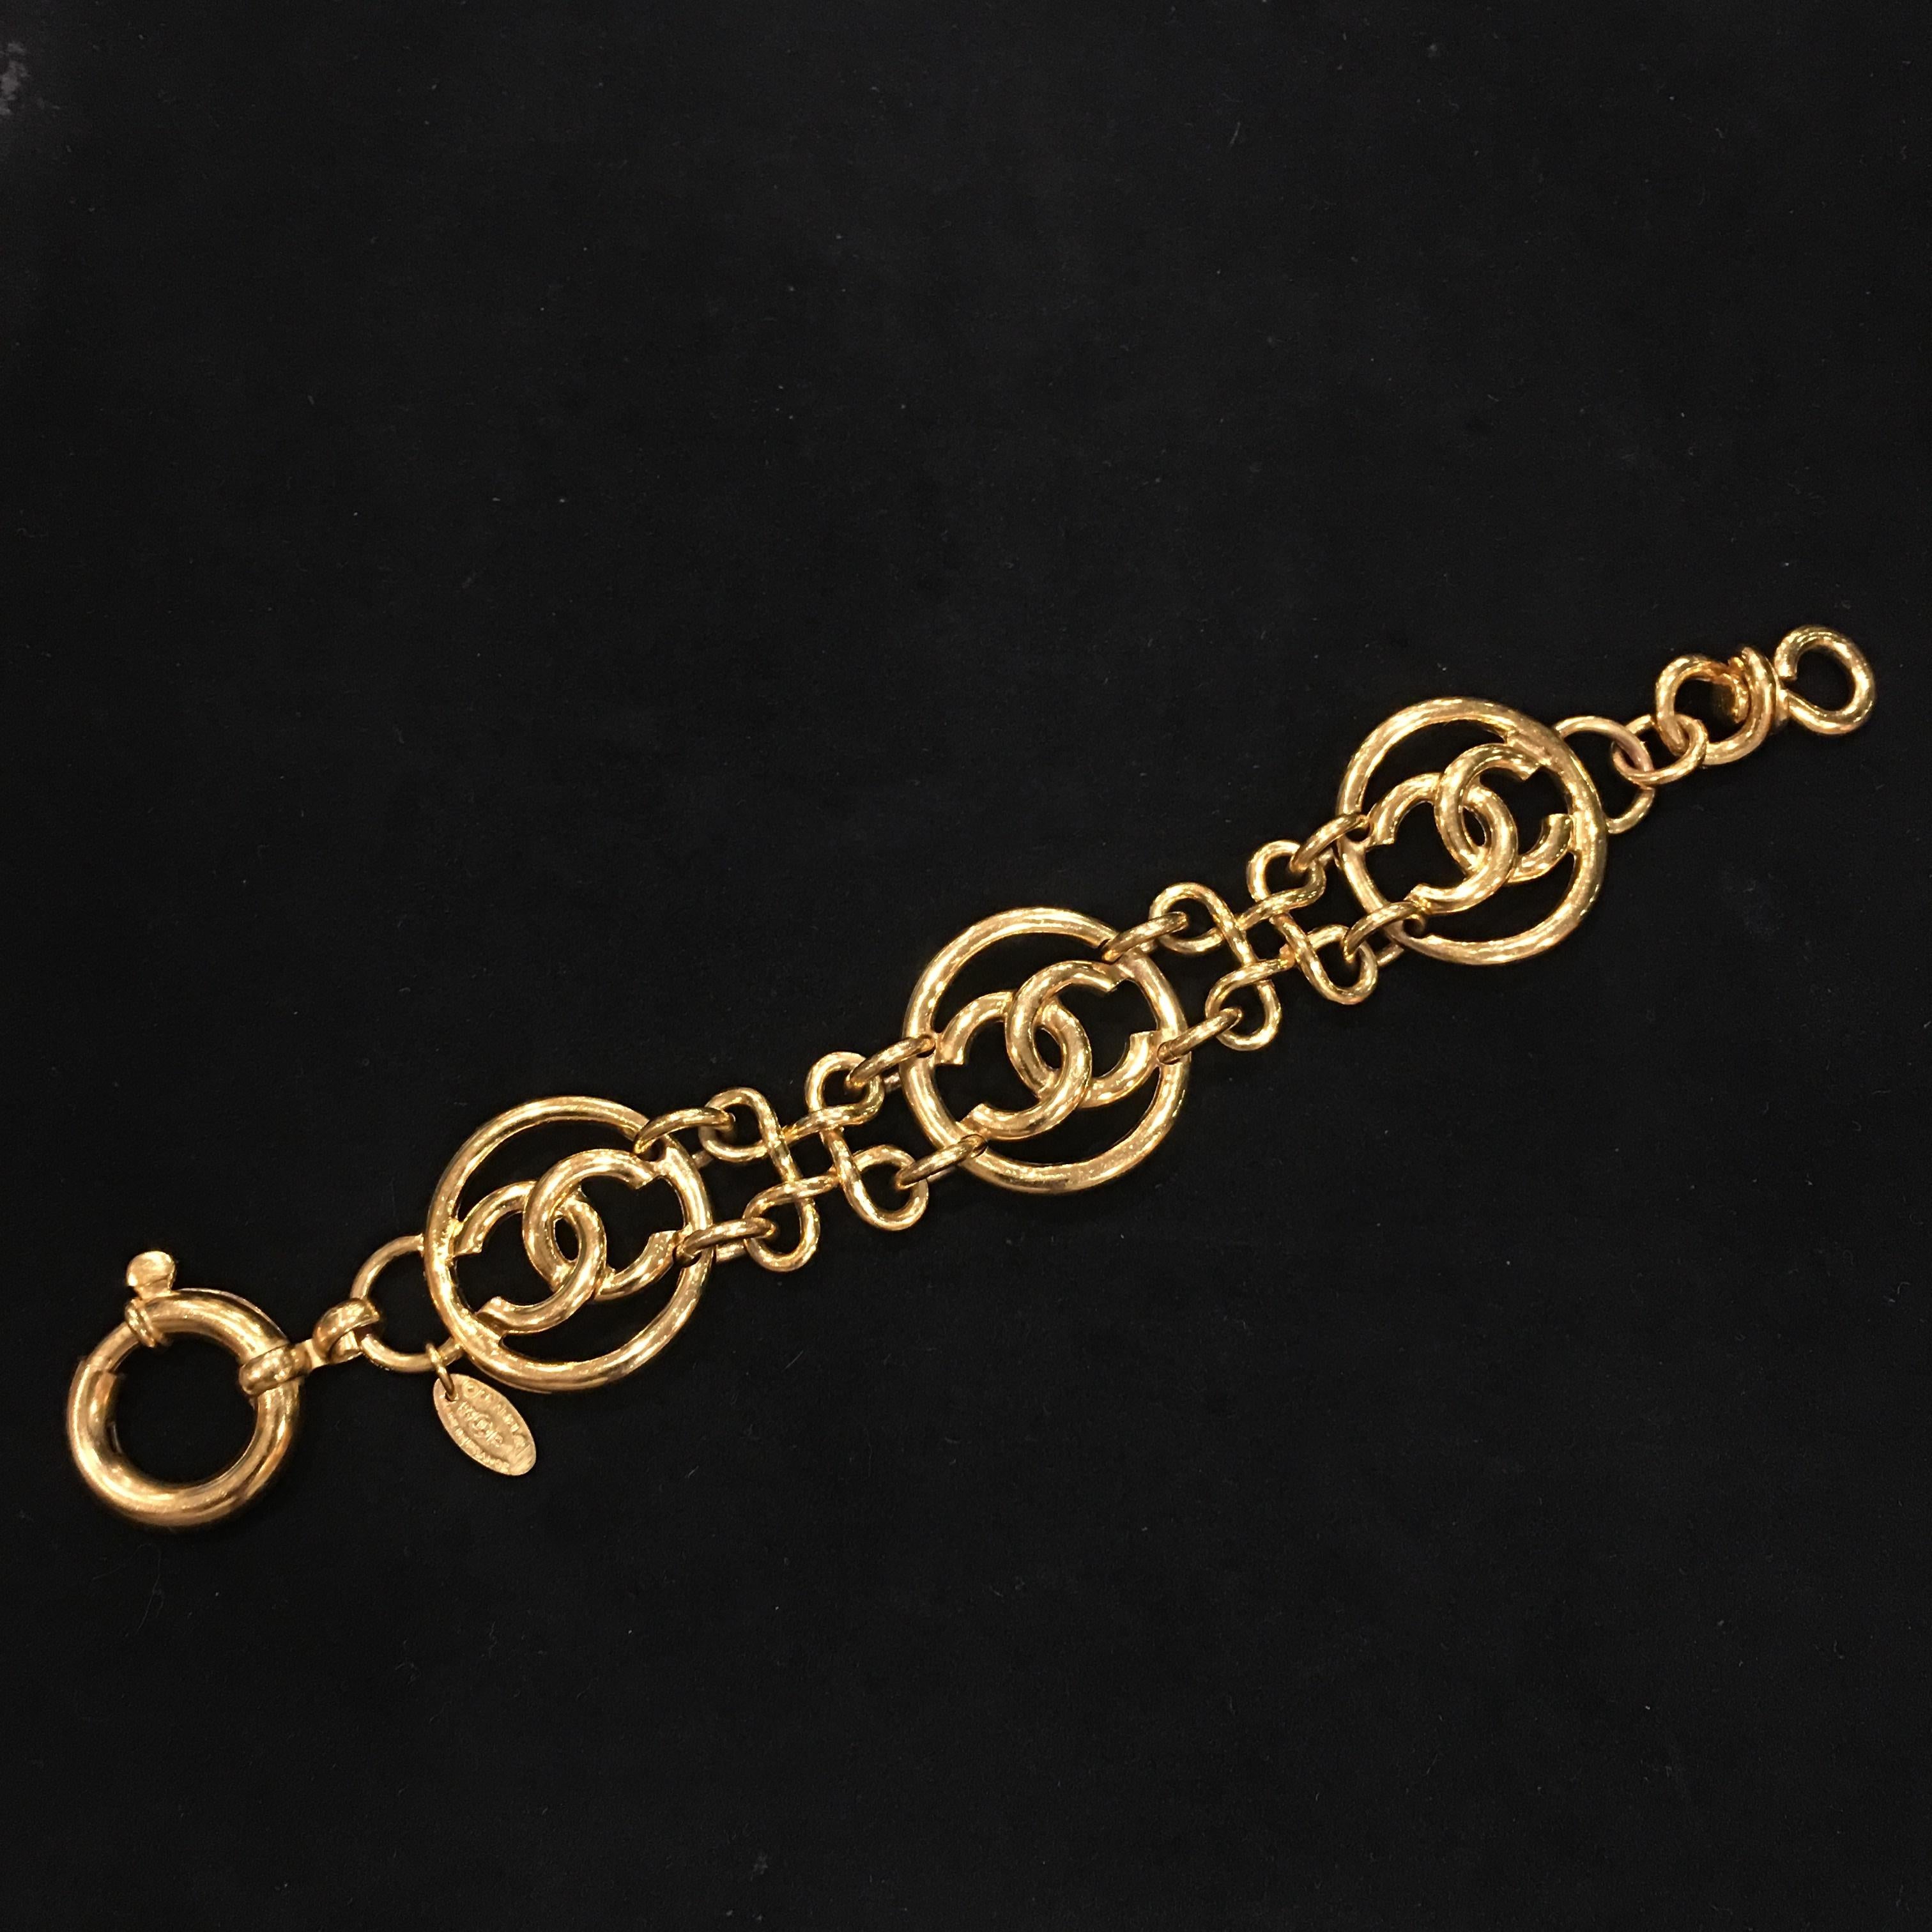 Brand: Chanel
Reference: JW322
Measurement of Logo Pendant: 2.8cm x 2.8cm
Length of Bracelet: 19cm
Material: Gilt Metal
Year: 1993
Made in France

Please Note: the jewelries are guarantee 100% authentic pre-owned therefore might have signs of